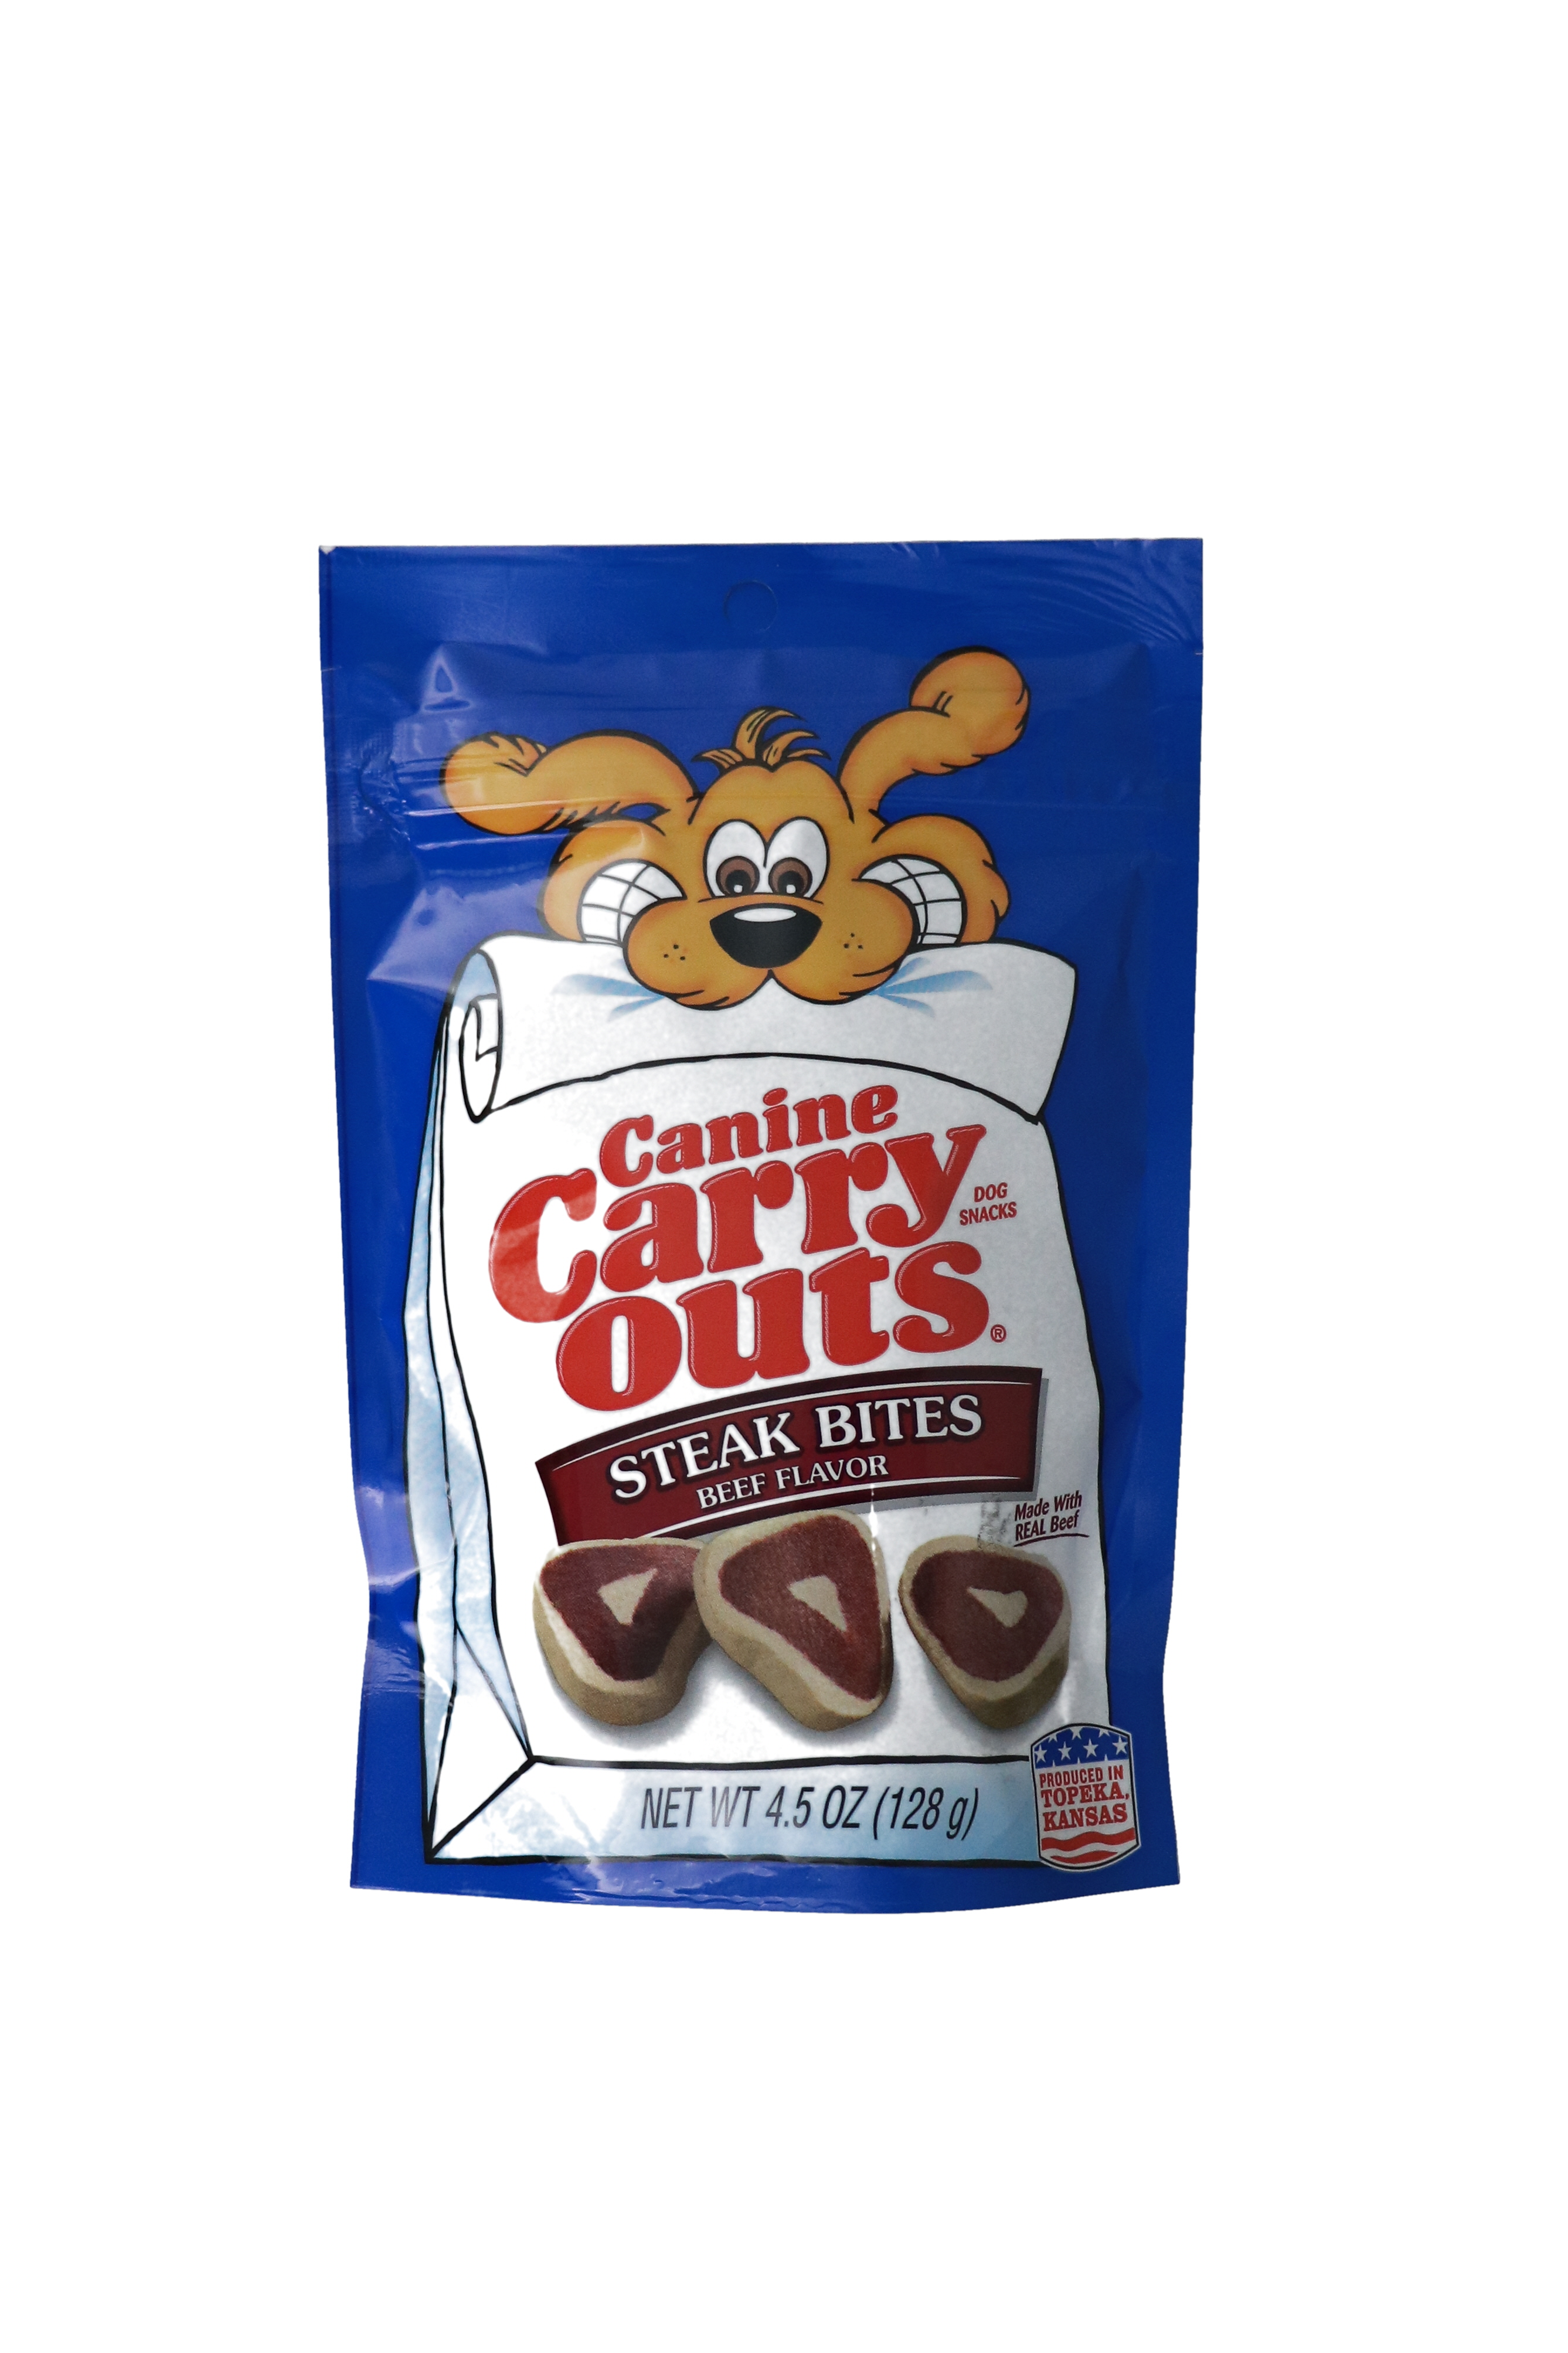 CANINE CARRY OUTS STEAK BITES